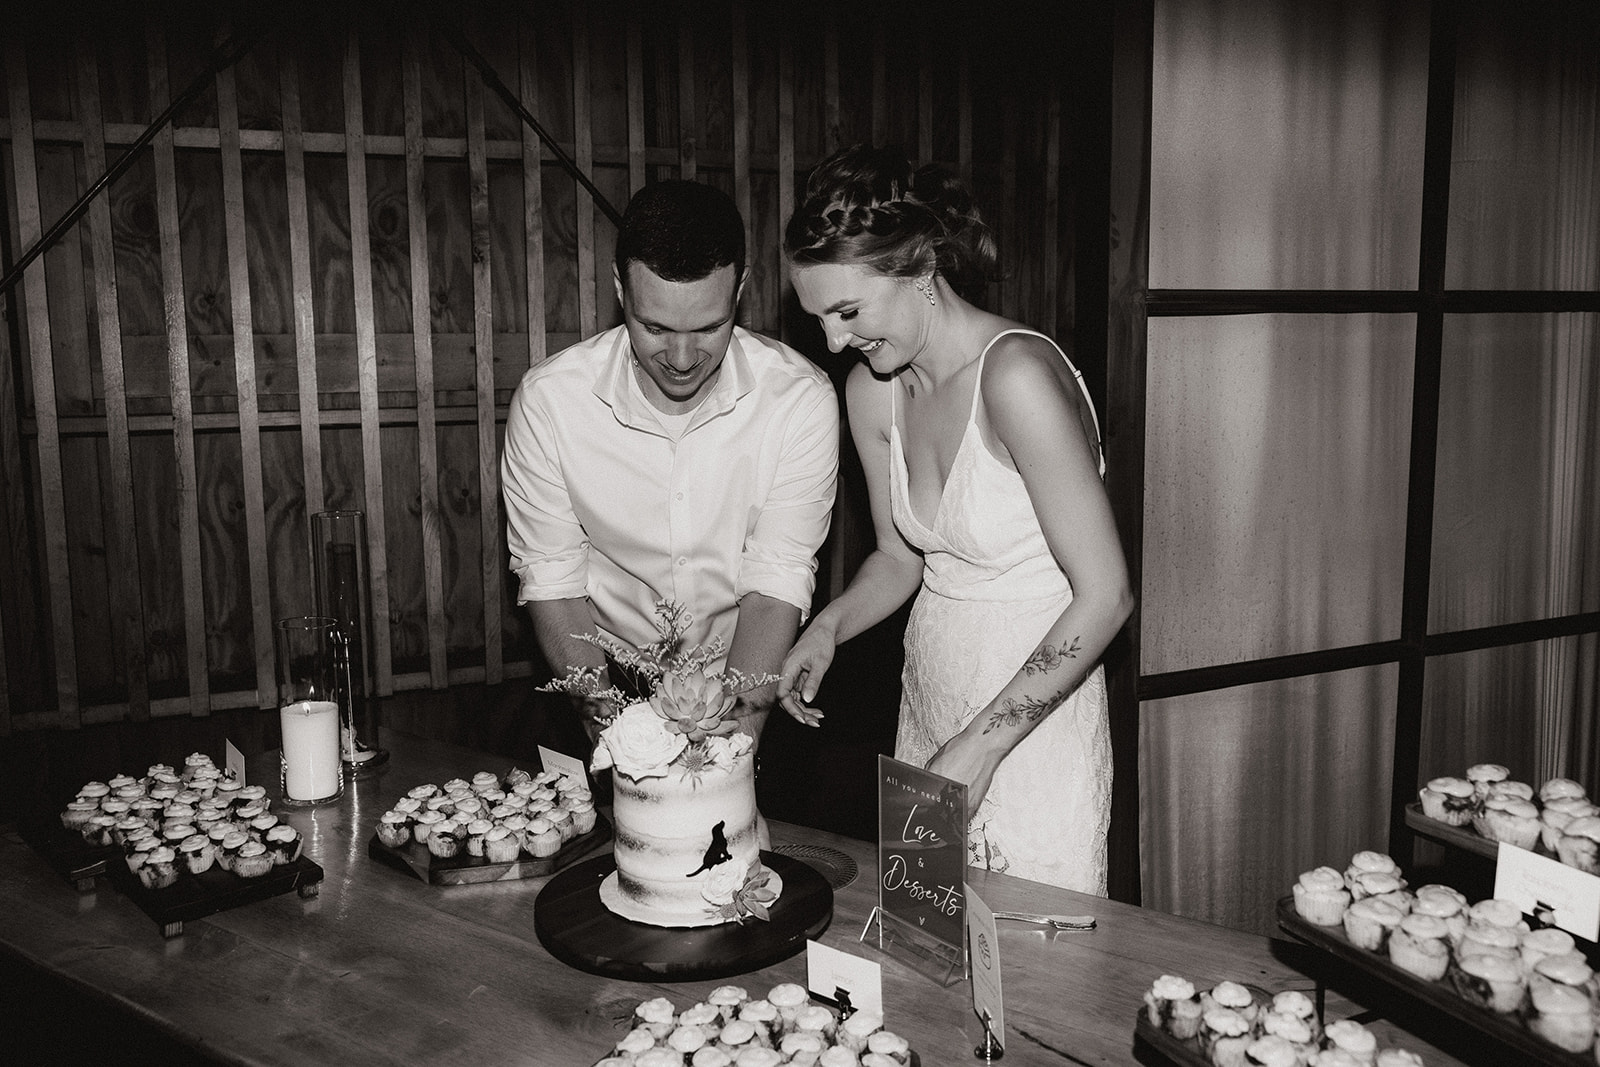 Bride and groom cut their wedding cake together